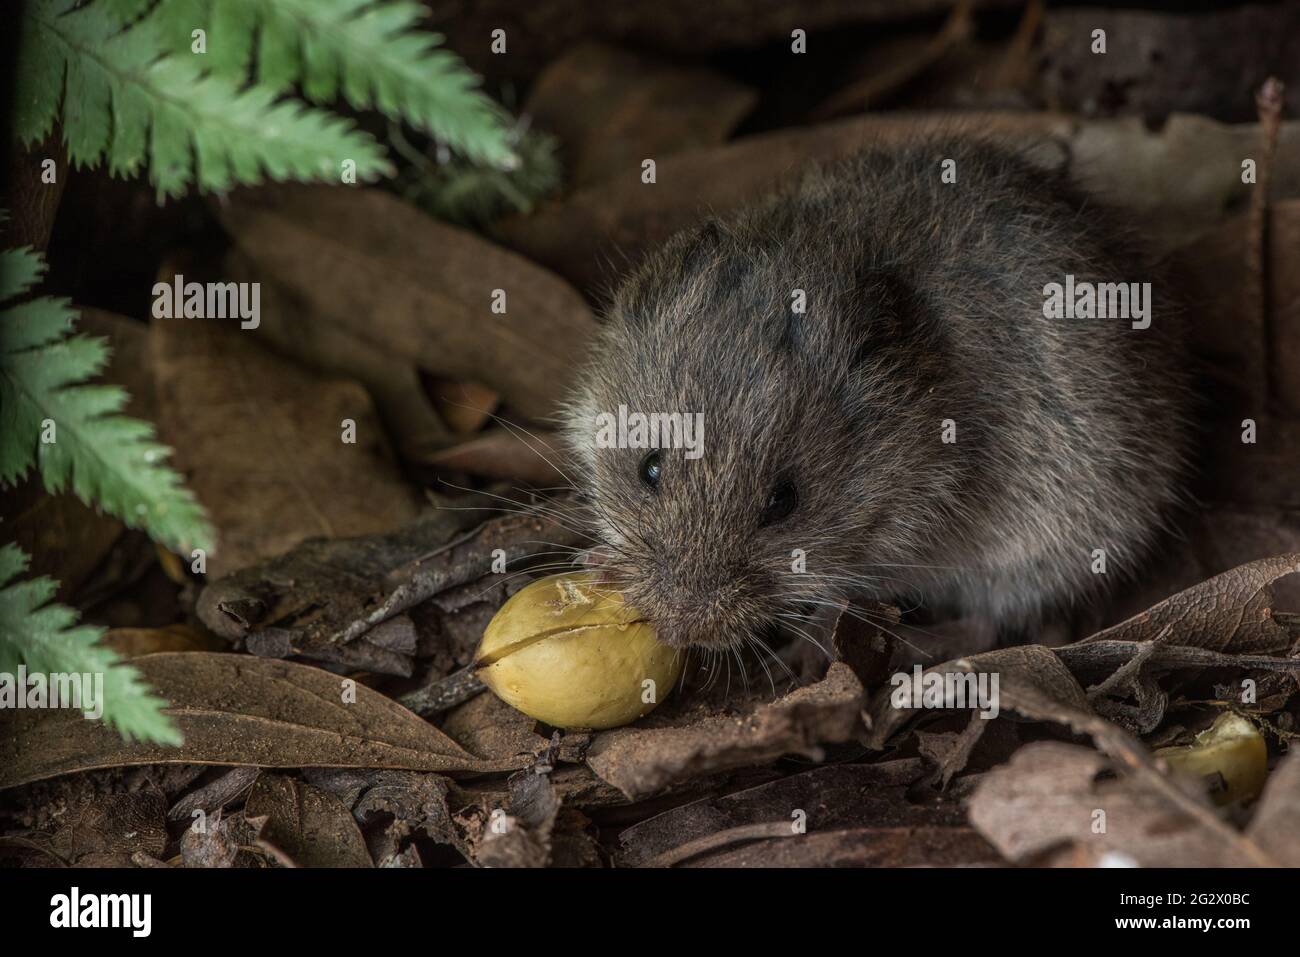 An adorable furry rodent, the California vole (microtus californicus) on the forest floor of a woodland in Marin county, California. Stock Photo